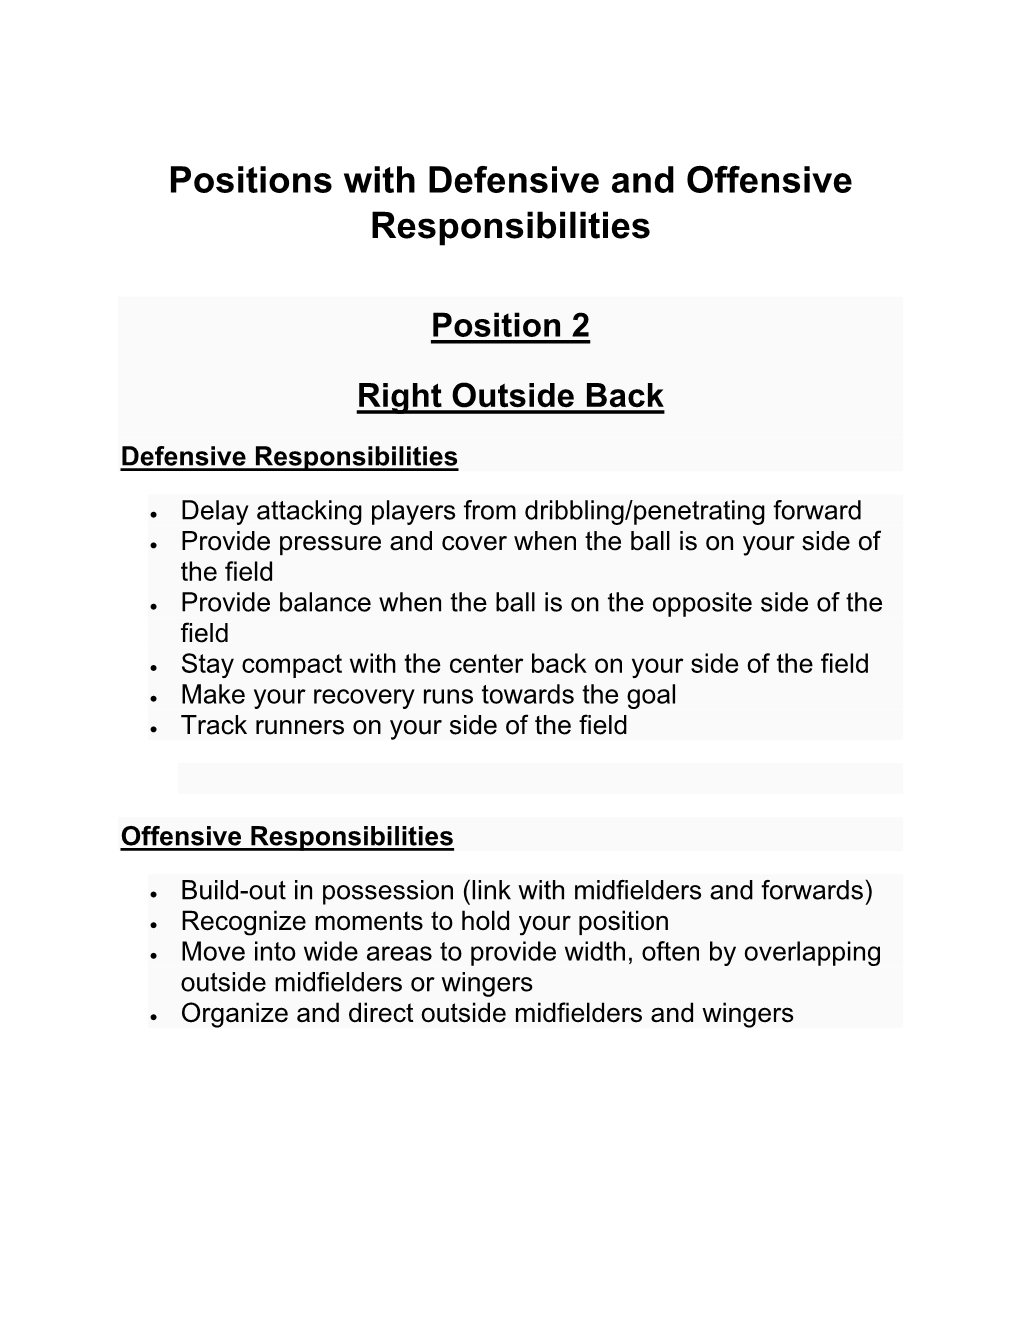 Positions with Defensive and Offensive Responsibilities